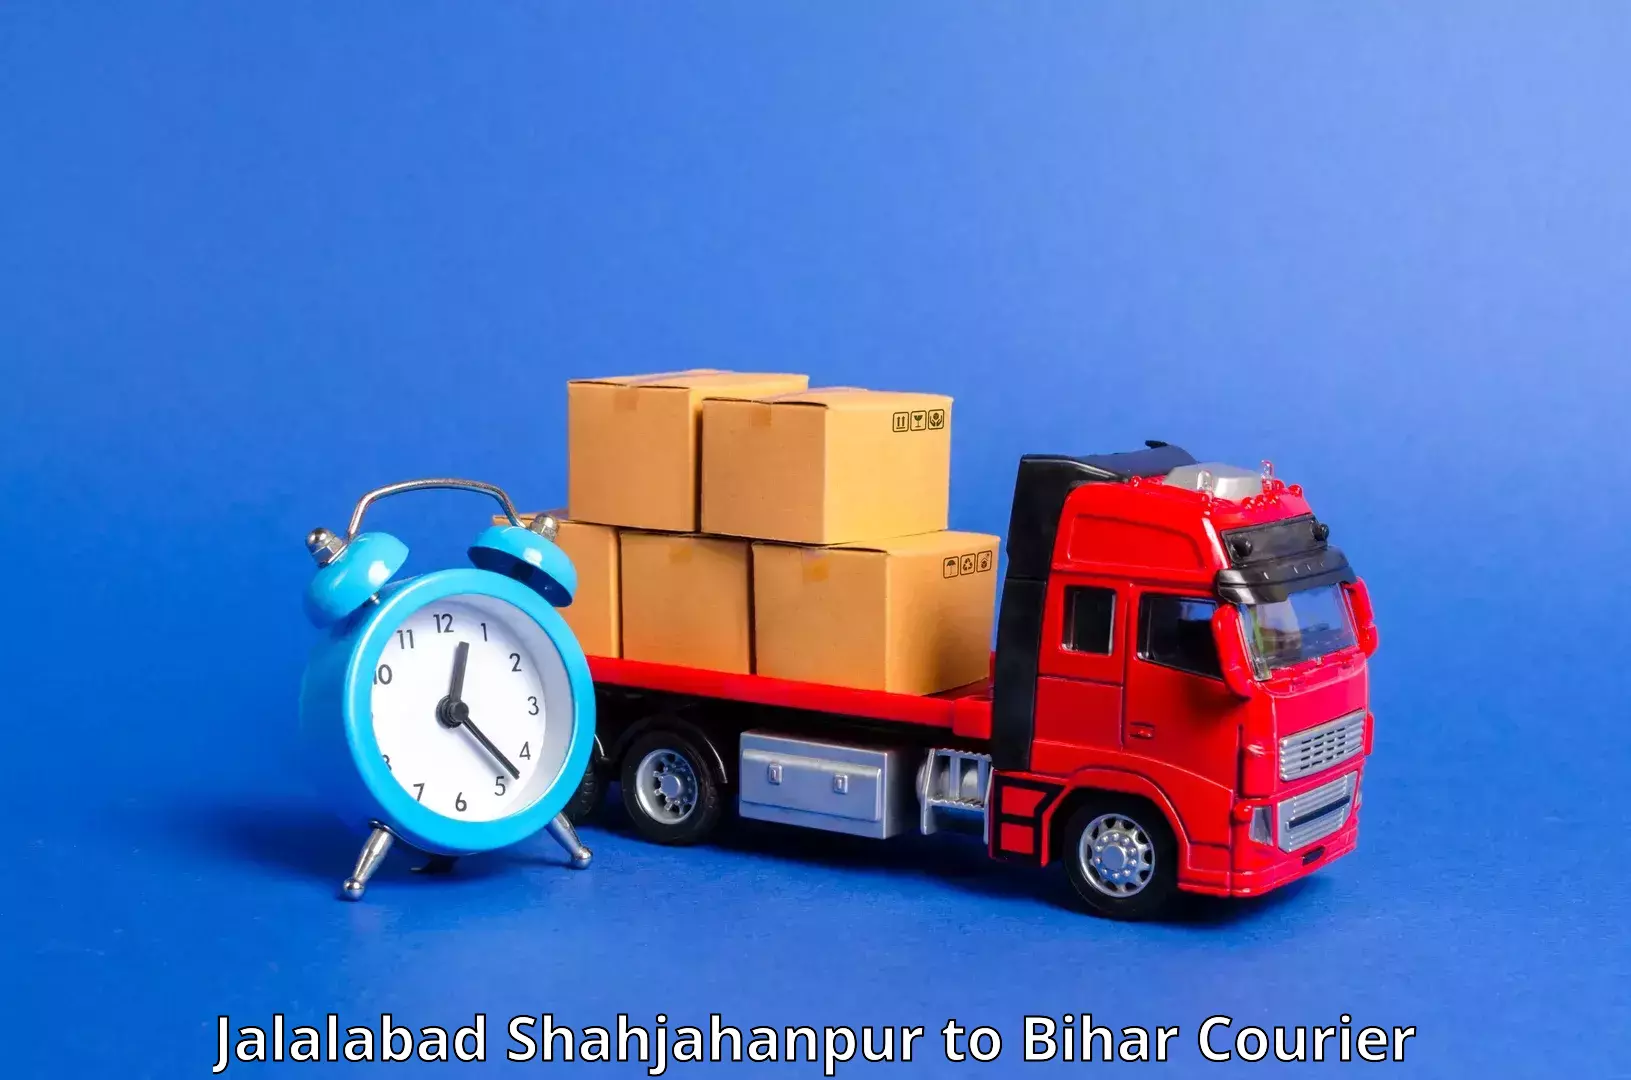 Courier service efficiency in Jalalabad Shahjahanpur to Jalalgarh